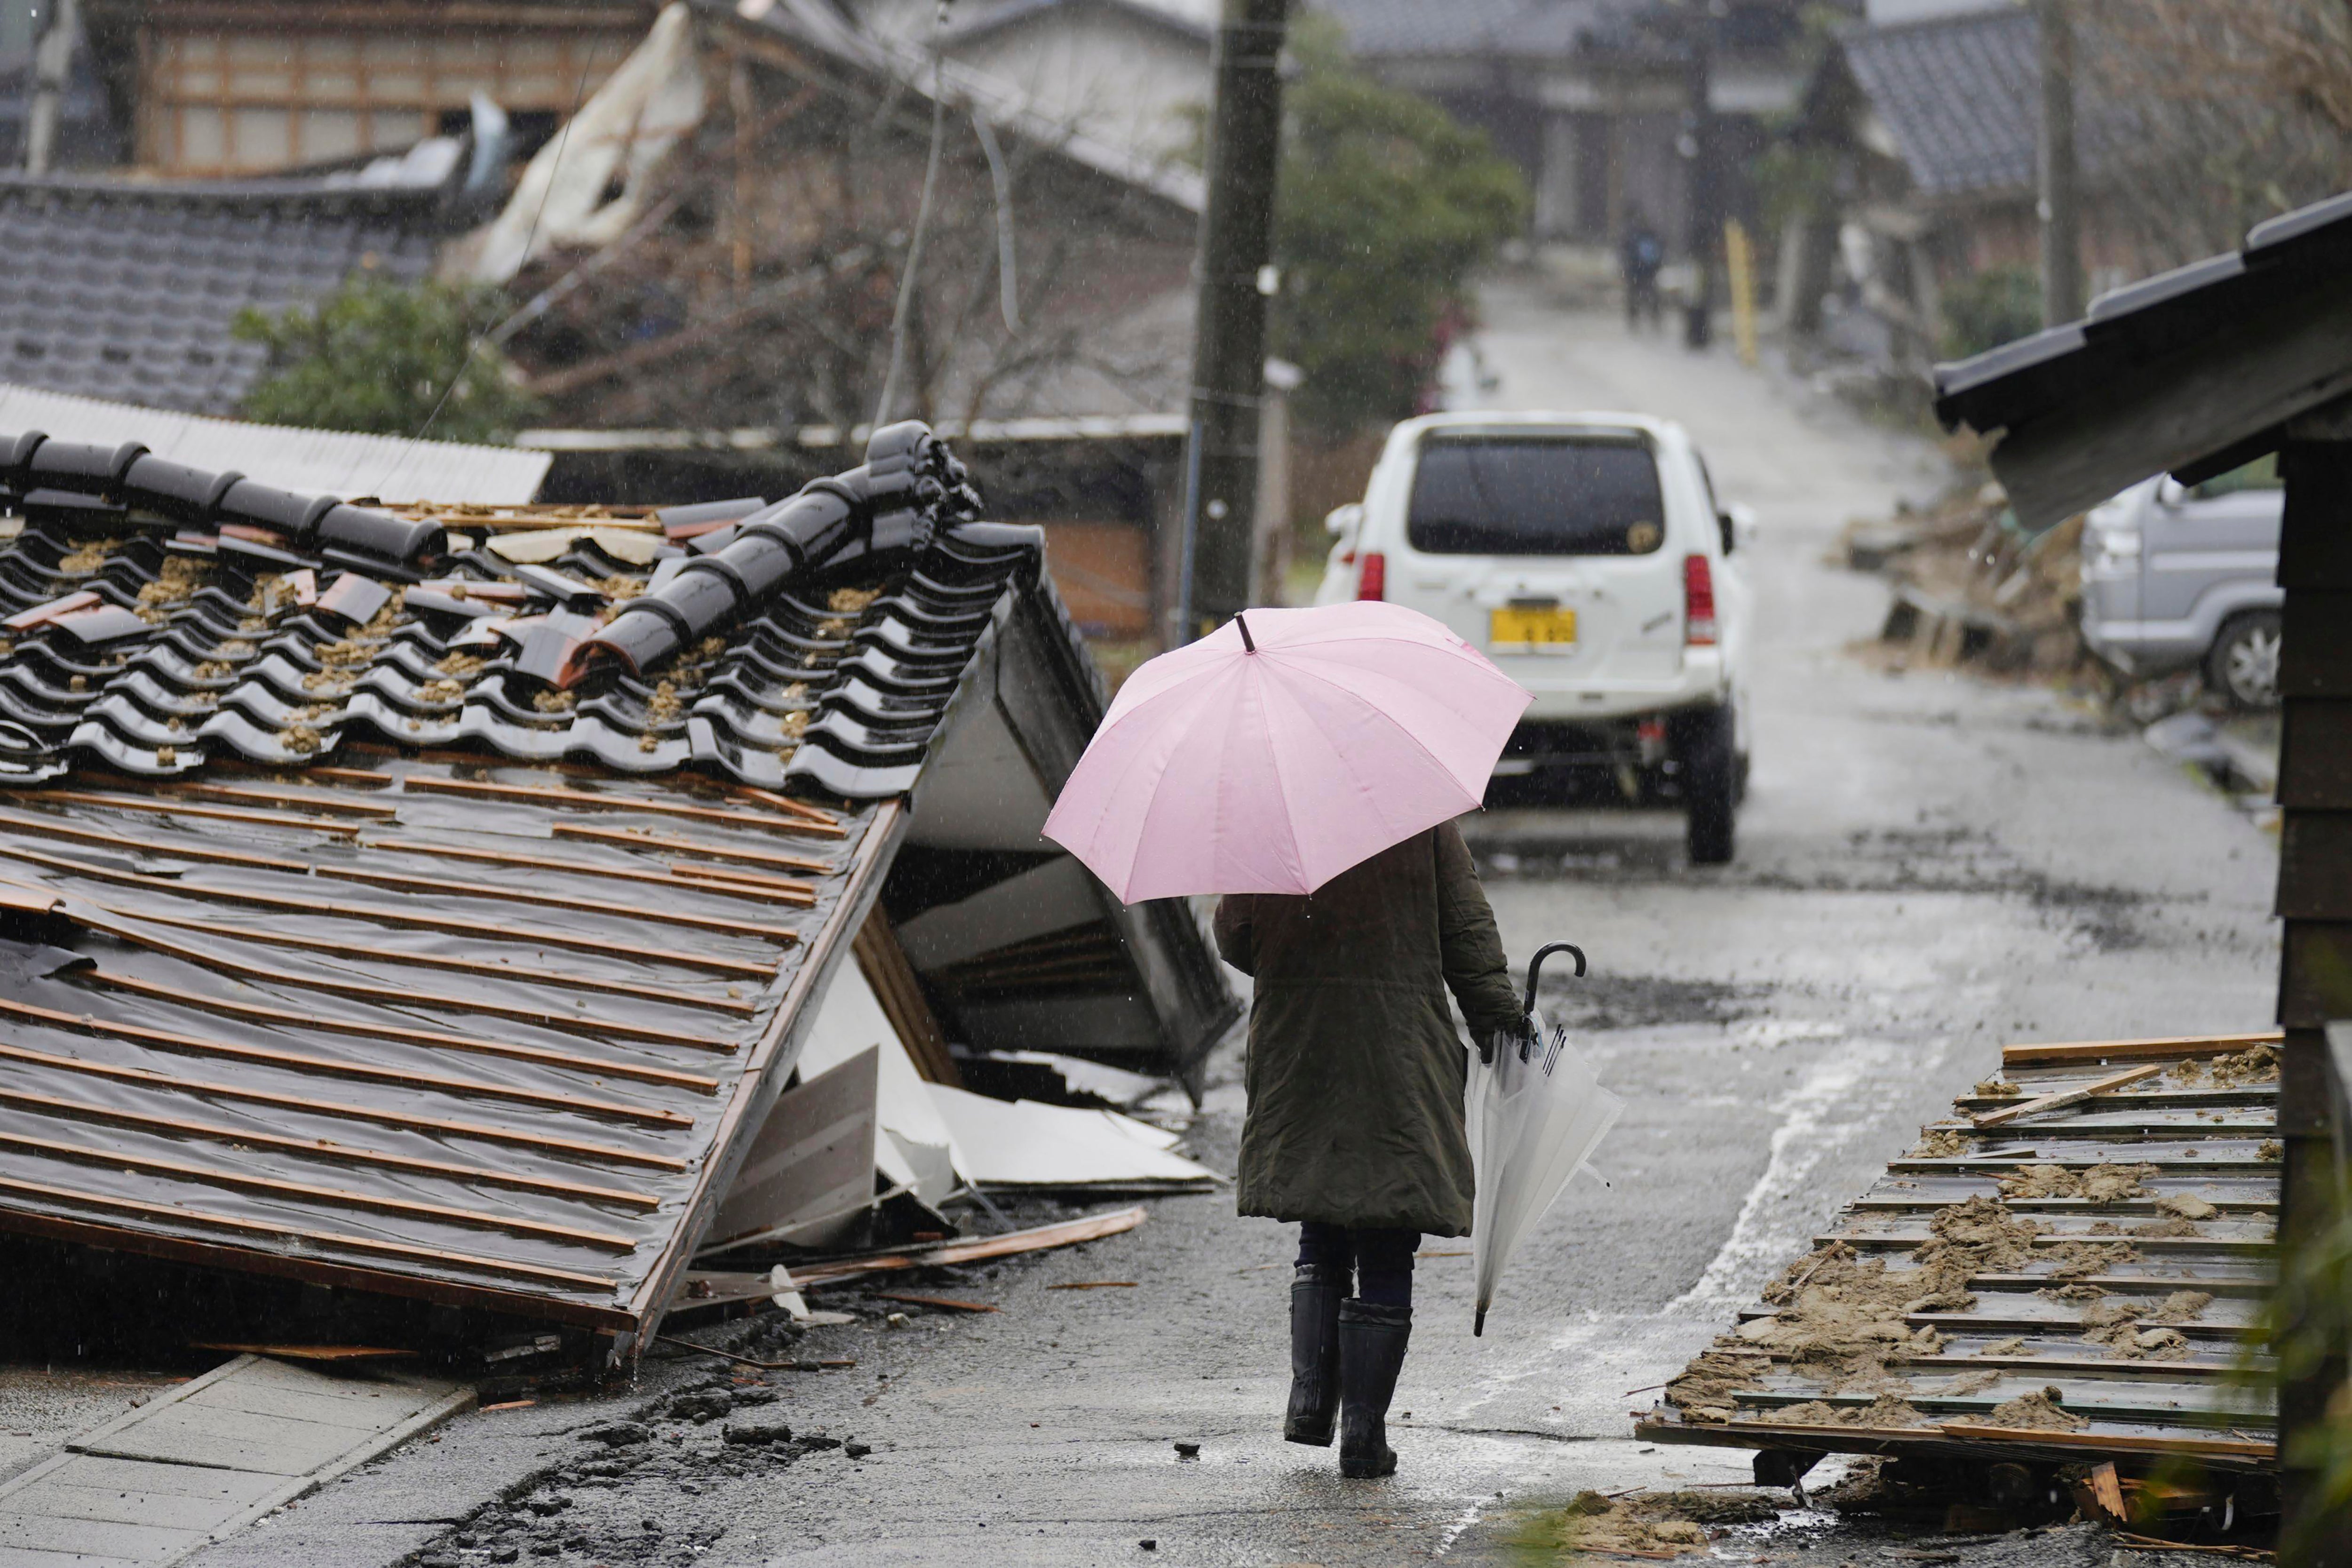 A person walks through the collapsed houses in Suzu, Ishikawa prefecture, Japan on Sunday